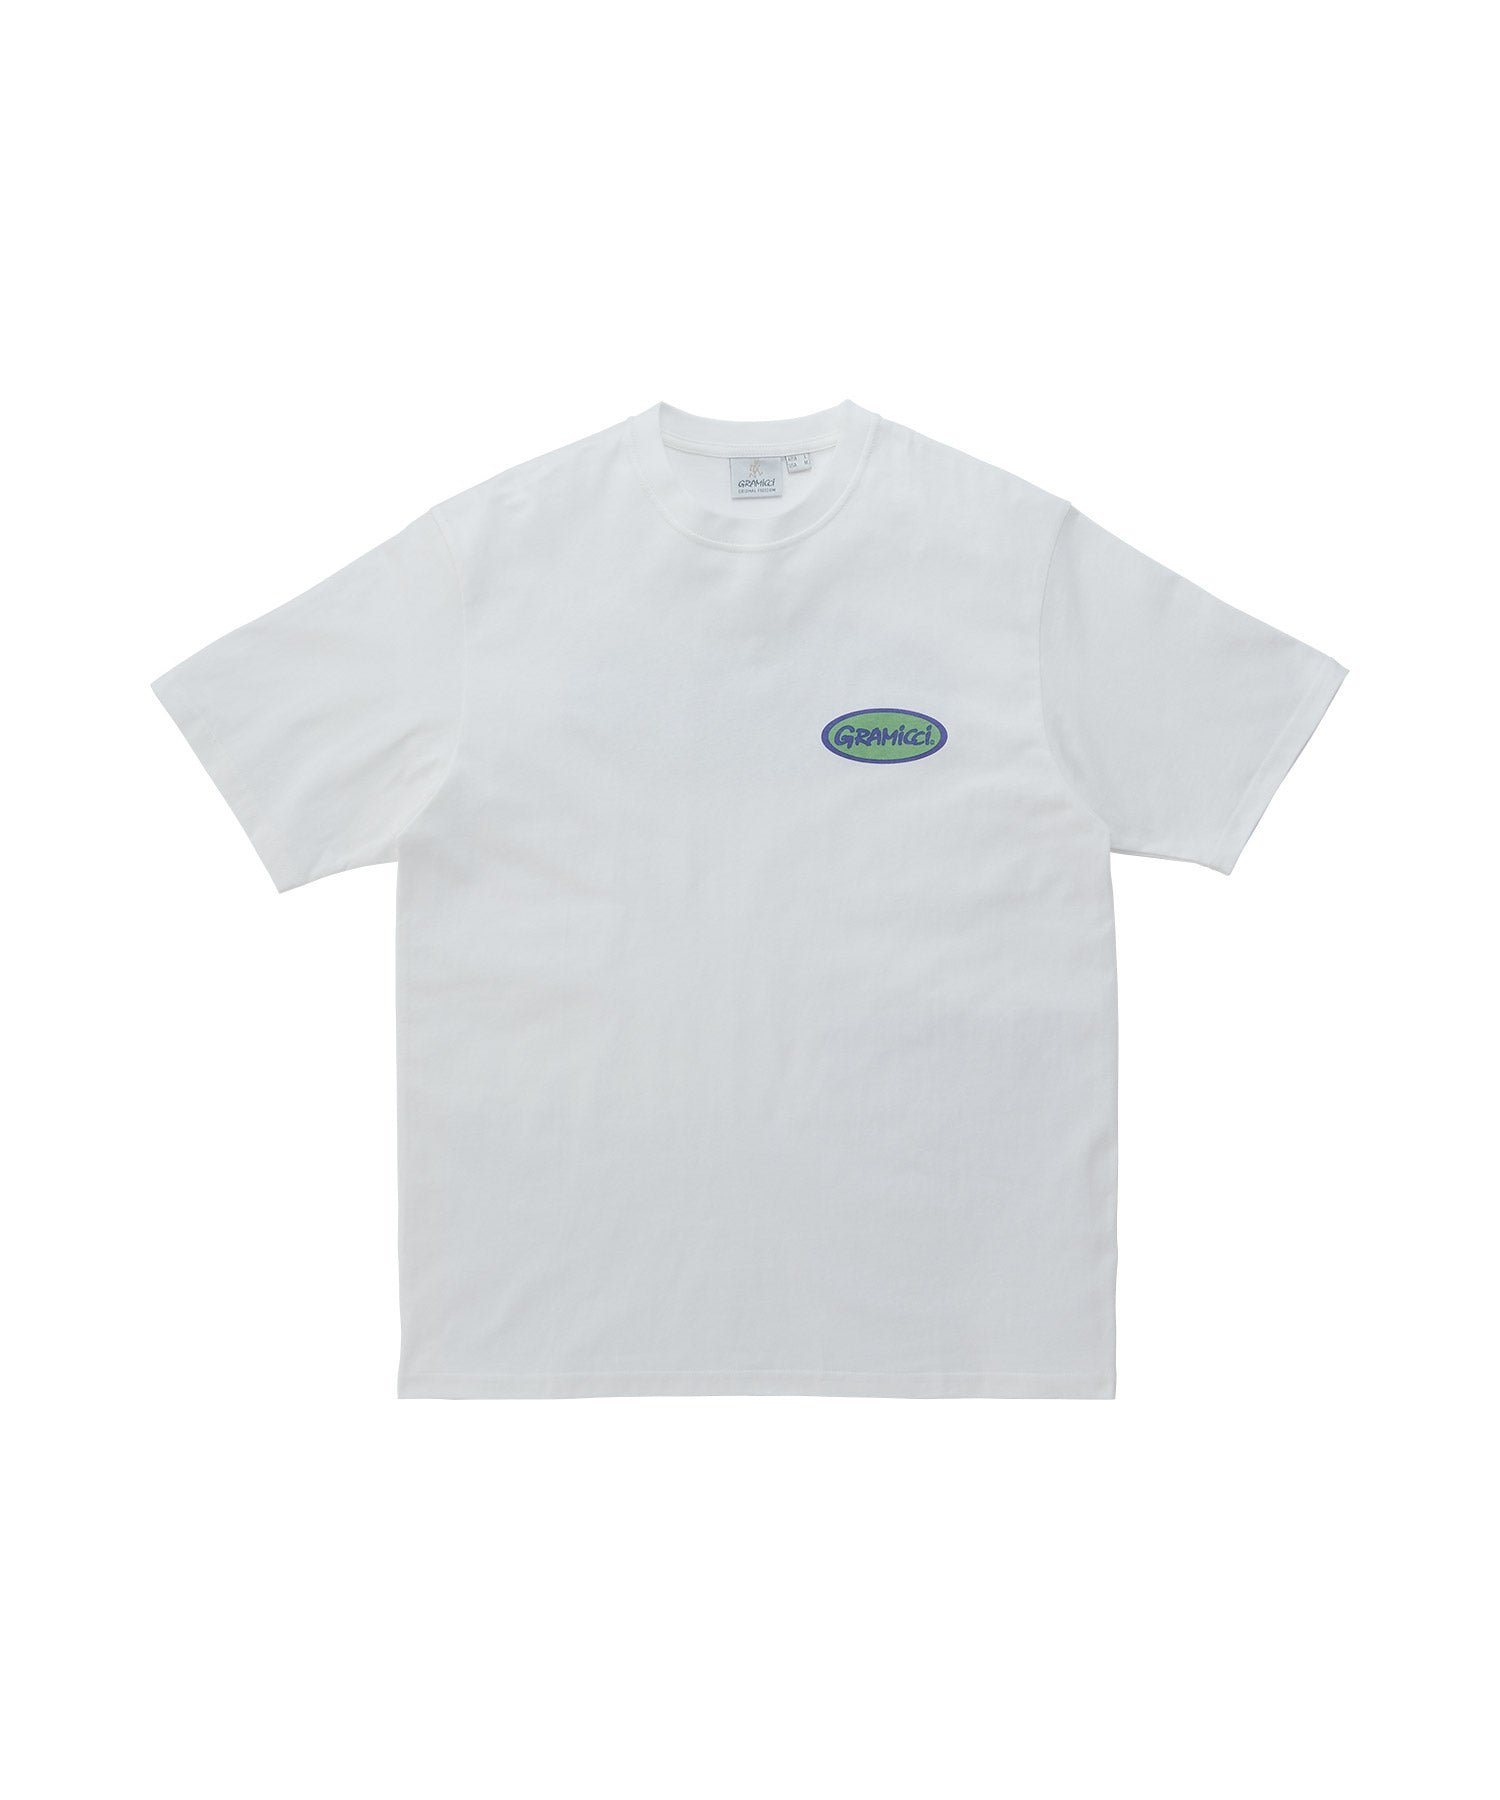 Image of GRAMICCI OVAL TEE WHITE